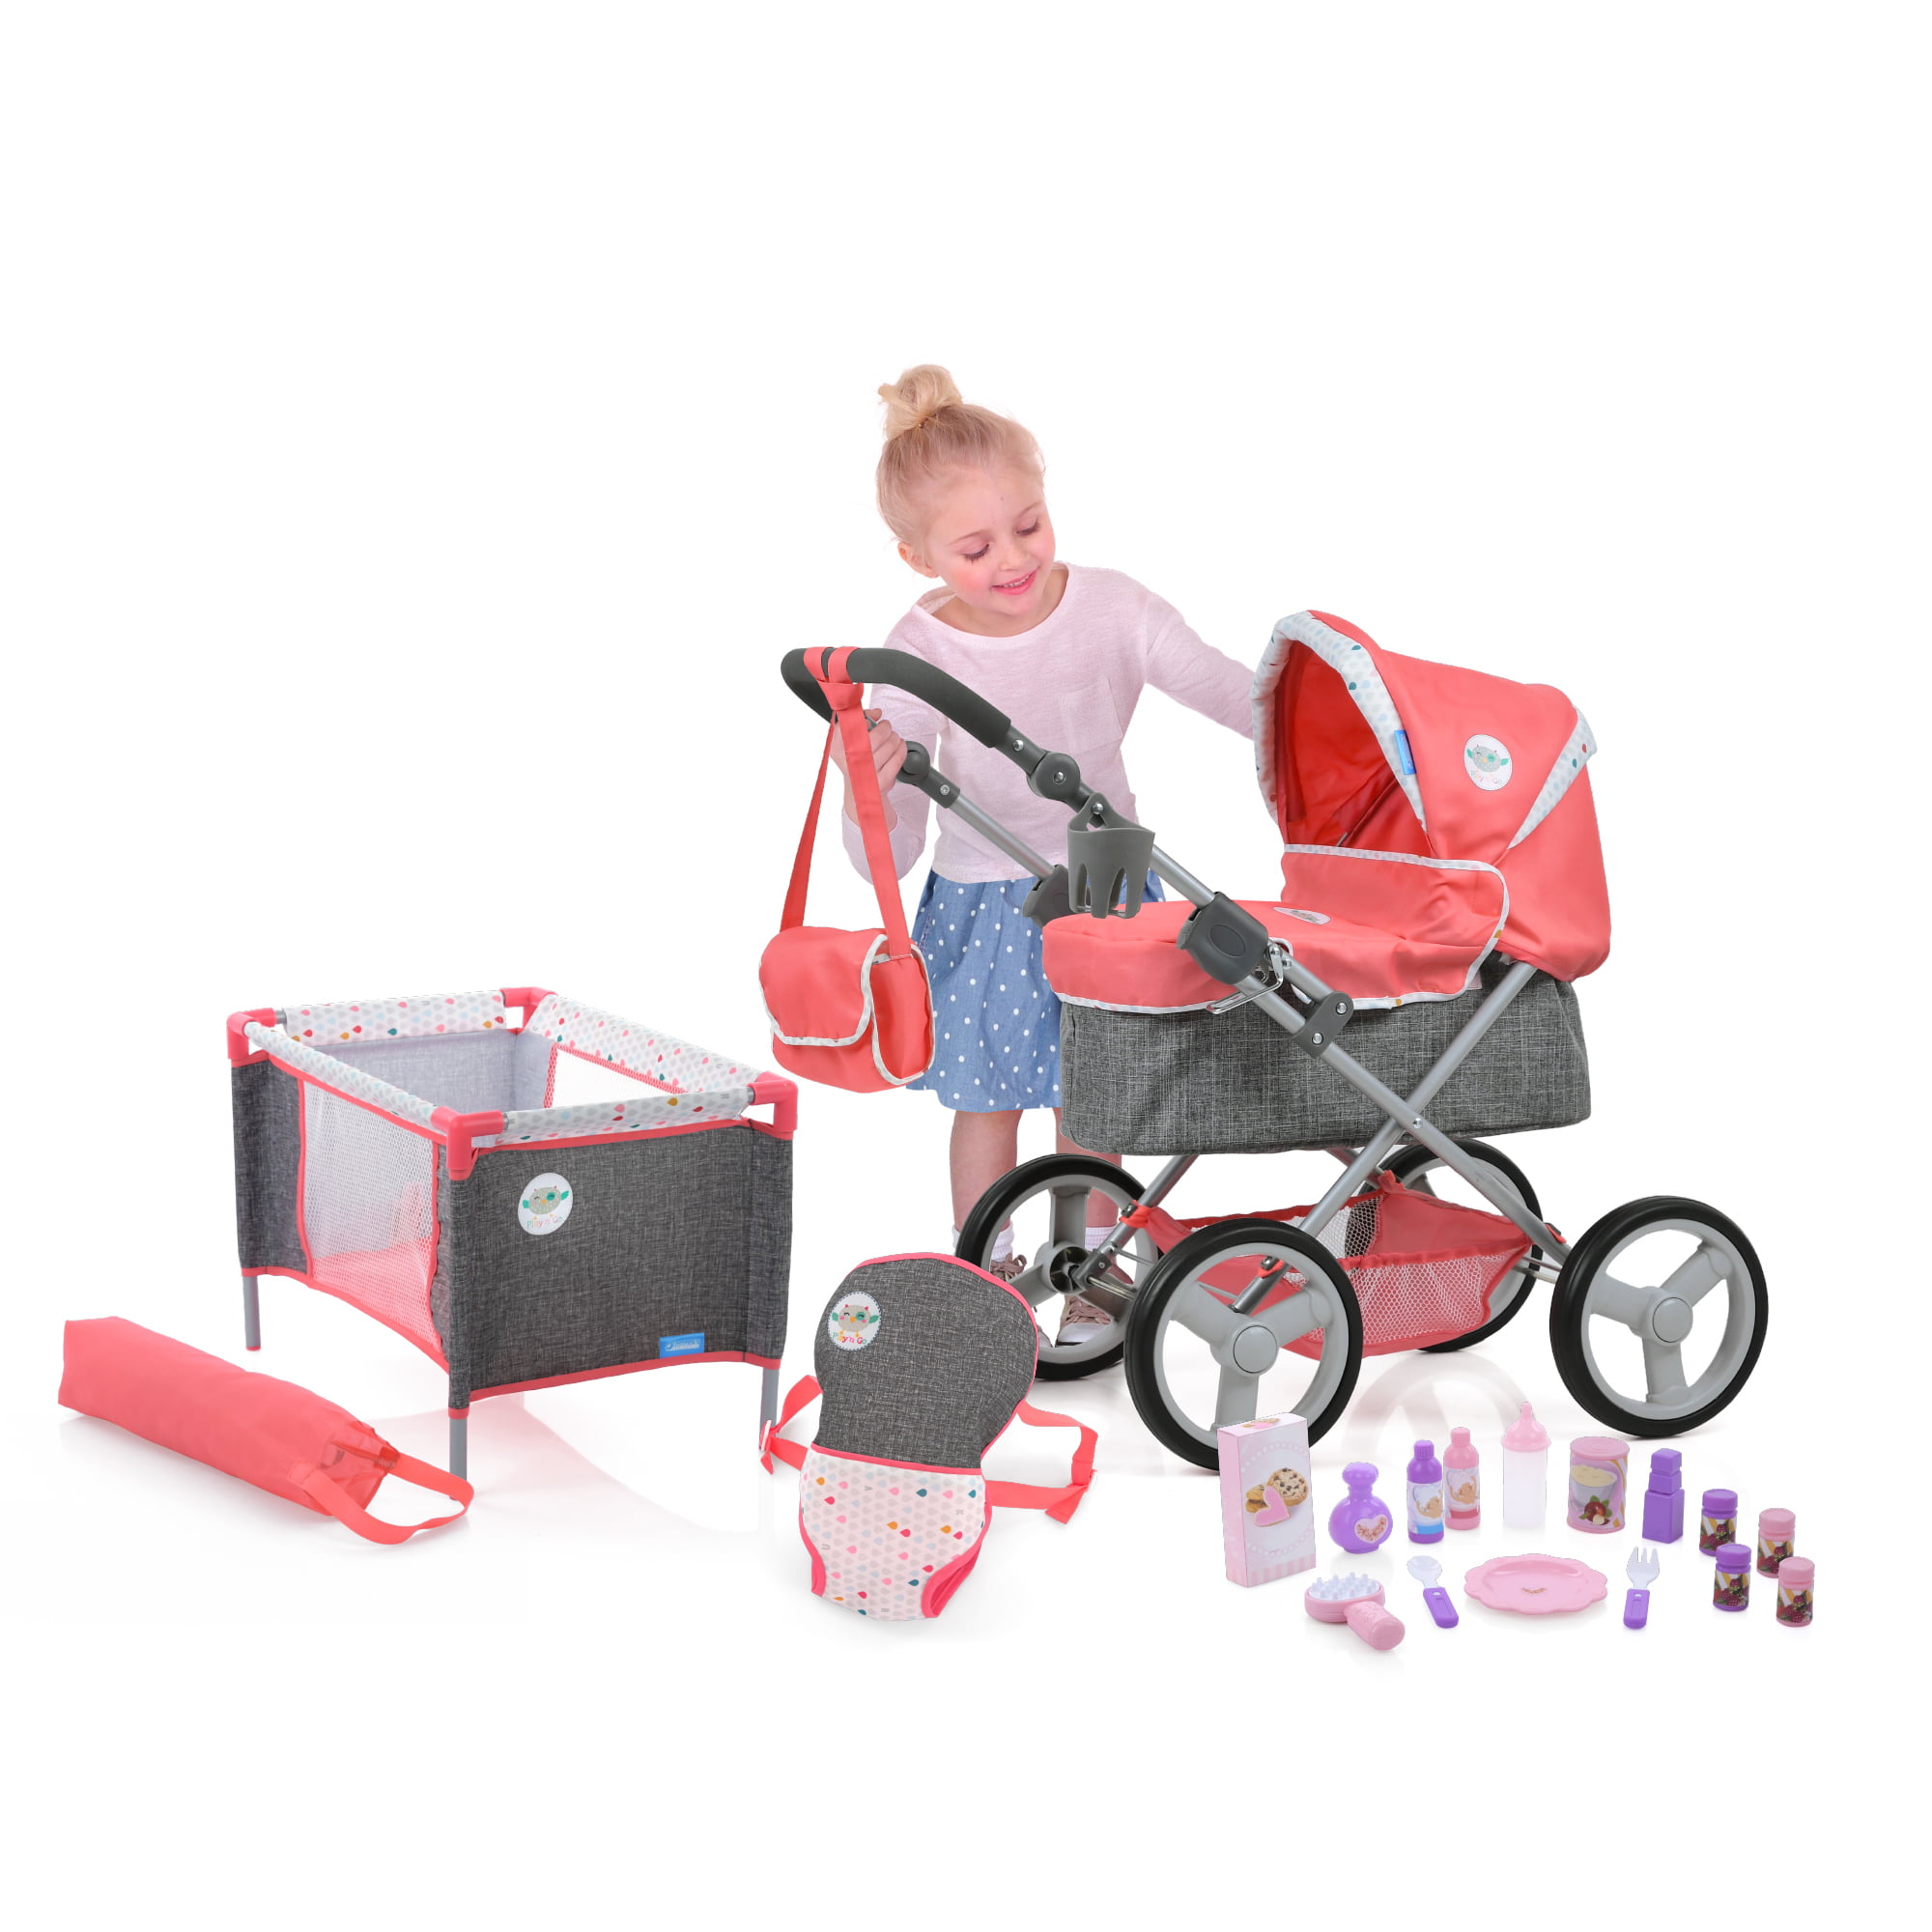 Carrier Diaper Bag, Yard, N Piece - Hauck Play Front Toy Doll Pram and Set Go Play 15